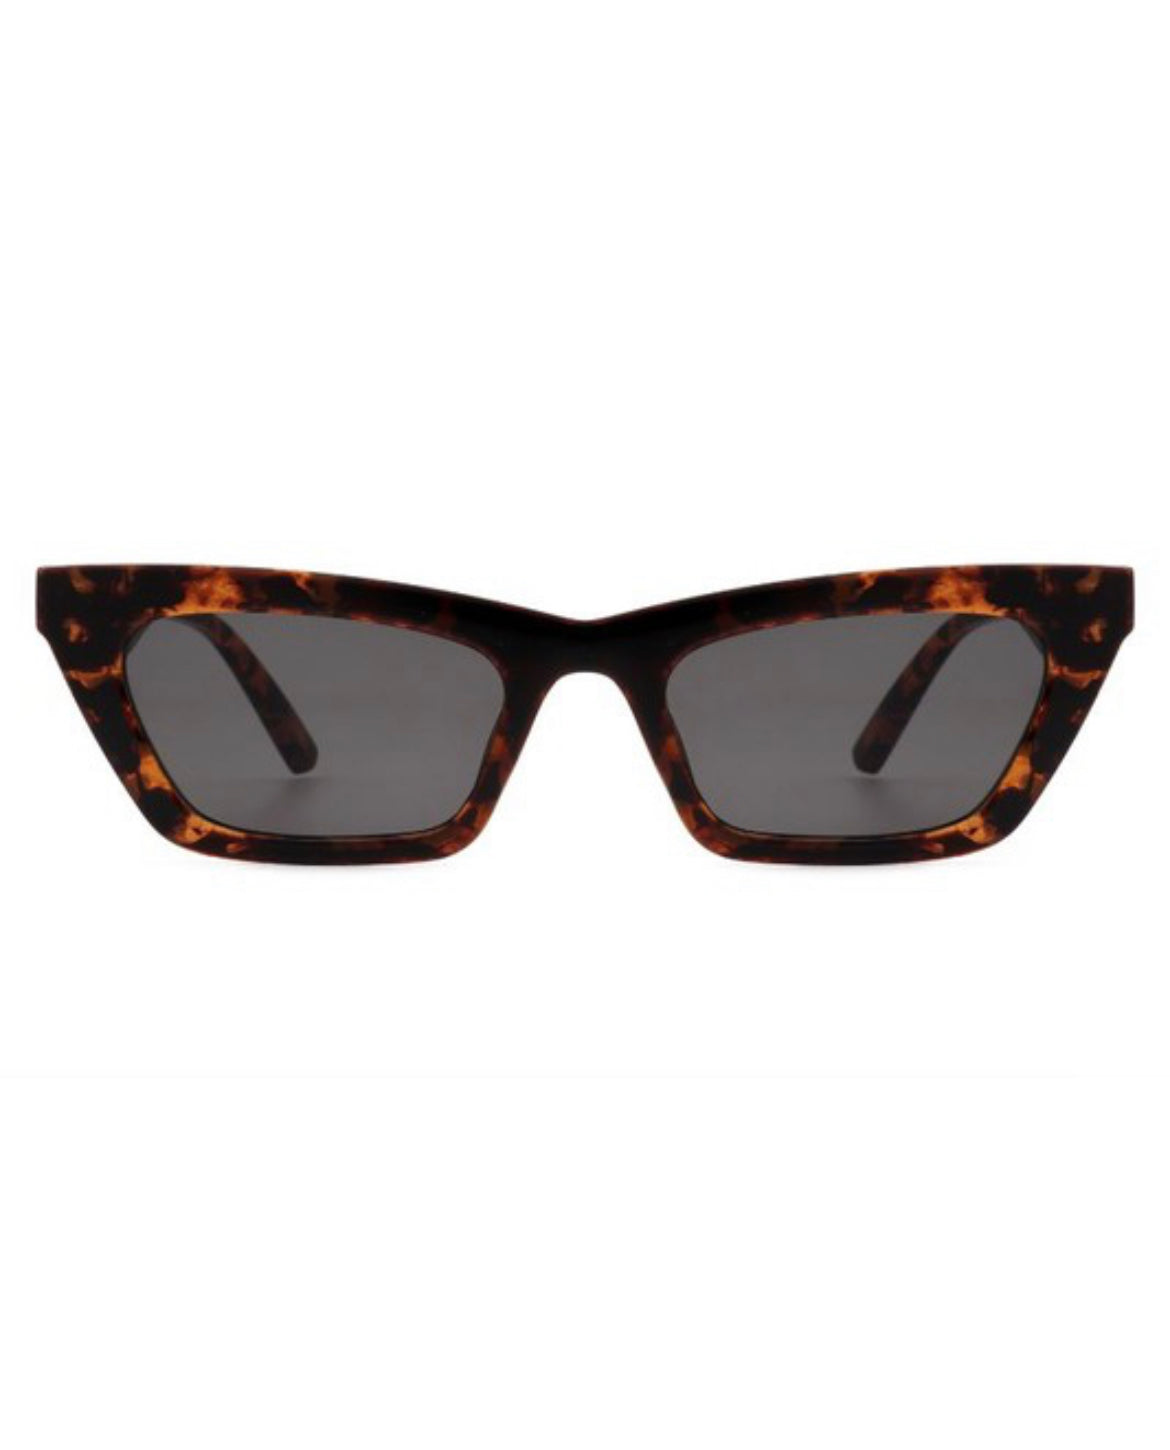 Favorite Summer Sunglasses (more colors available)